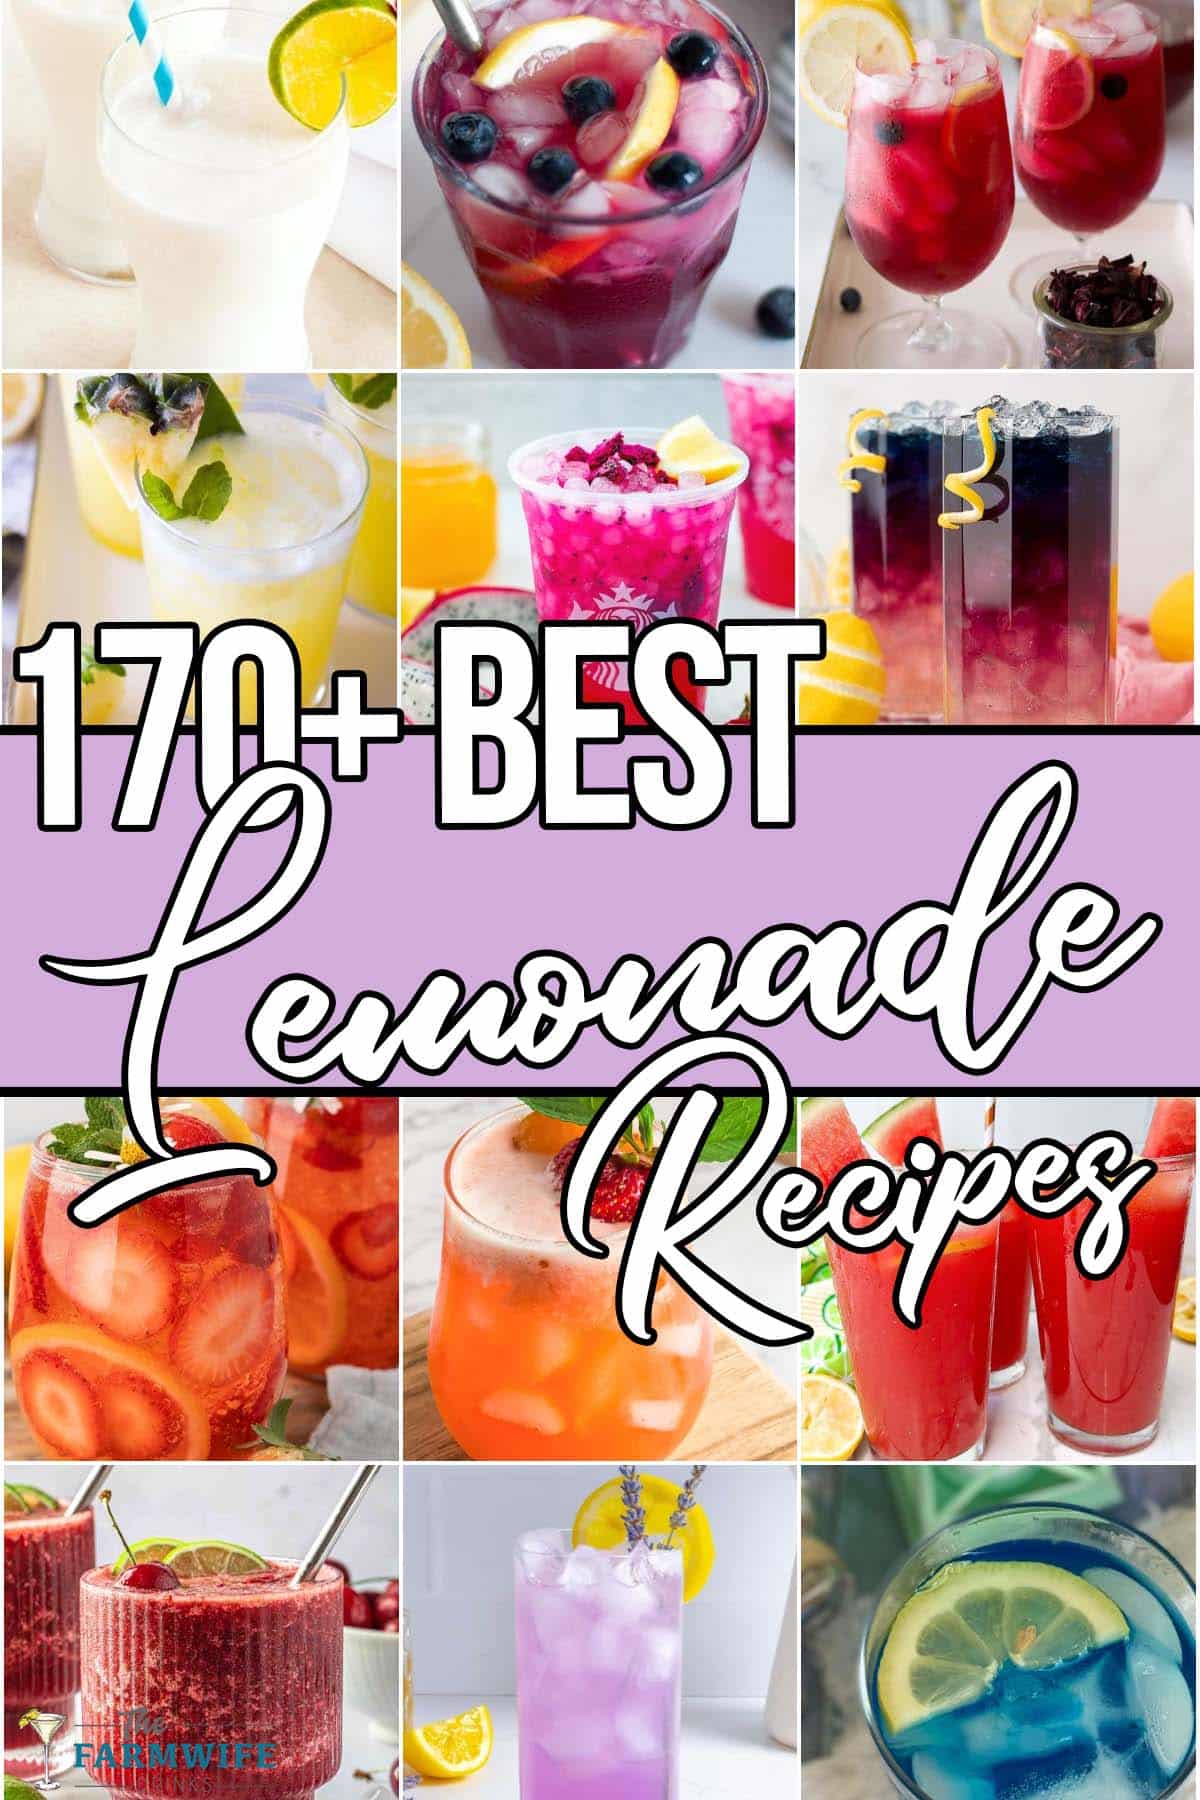 photo collage of lemonade variations with text which reads 170+ best lemonade recipes